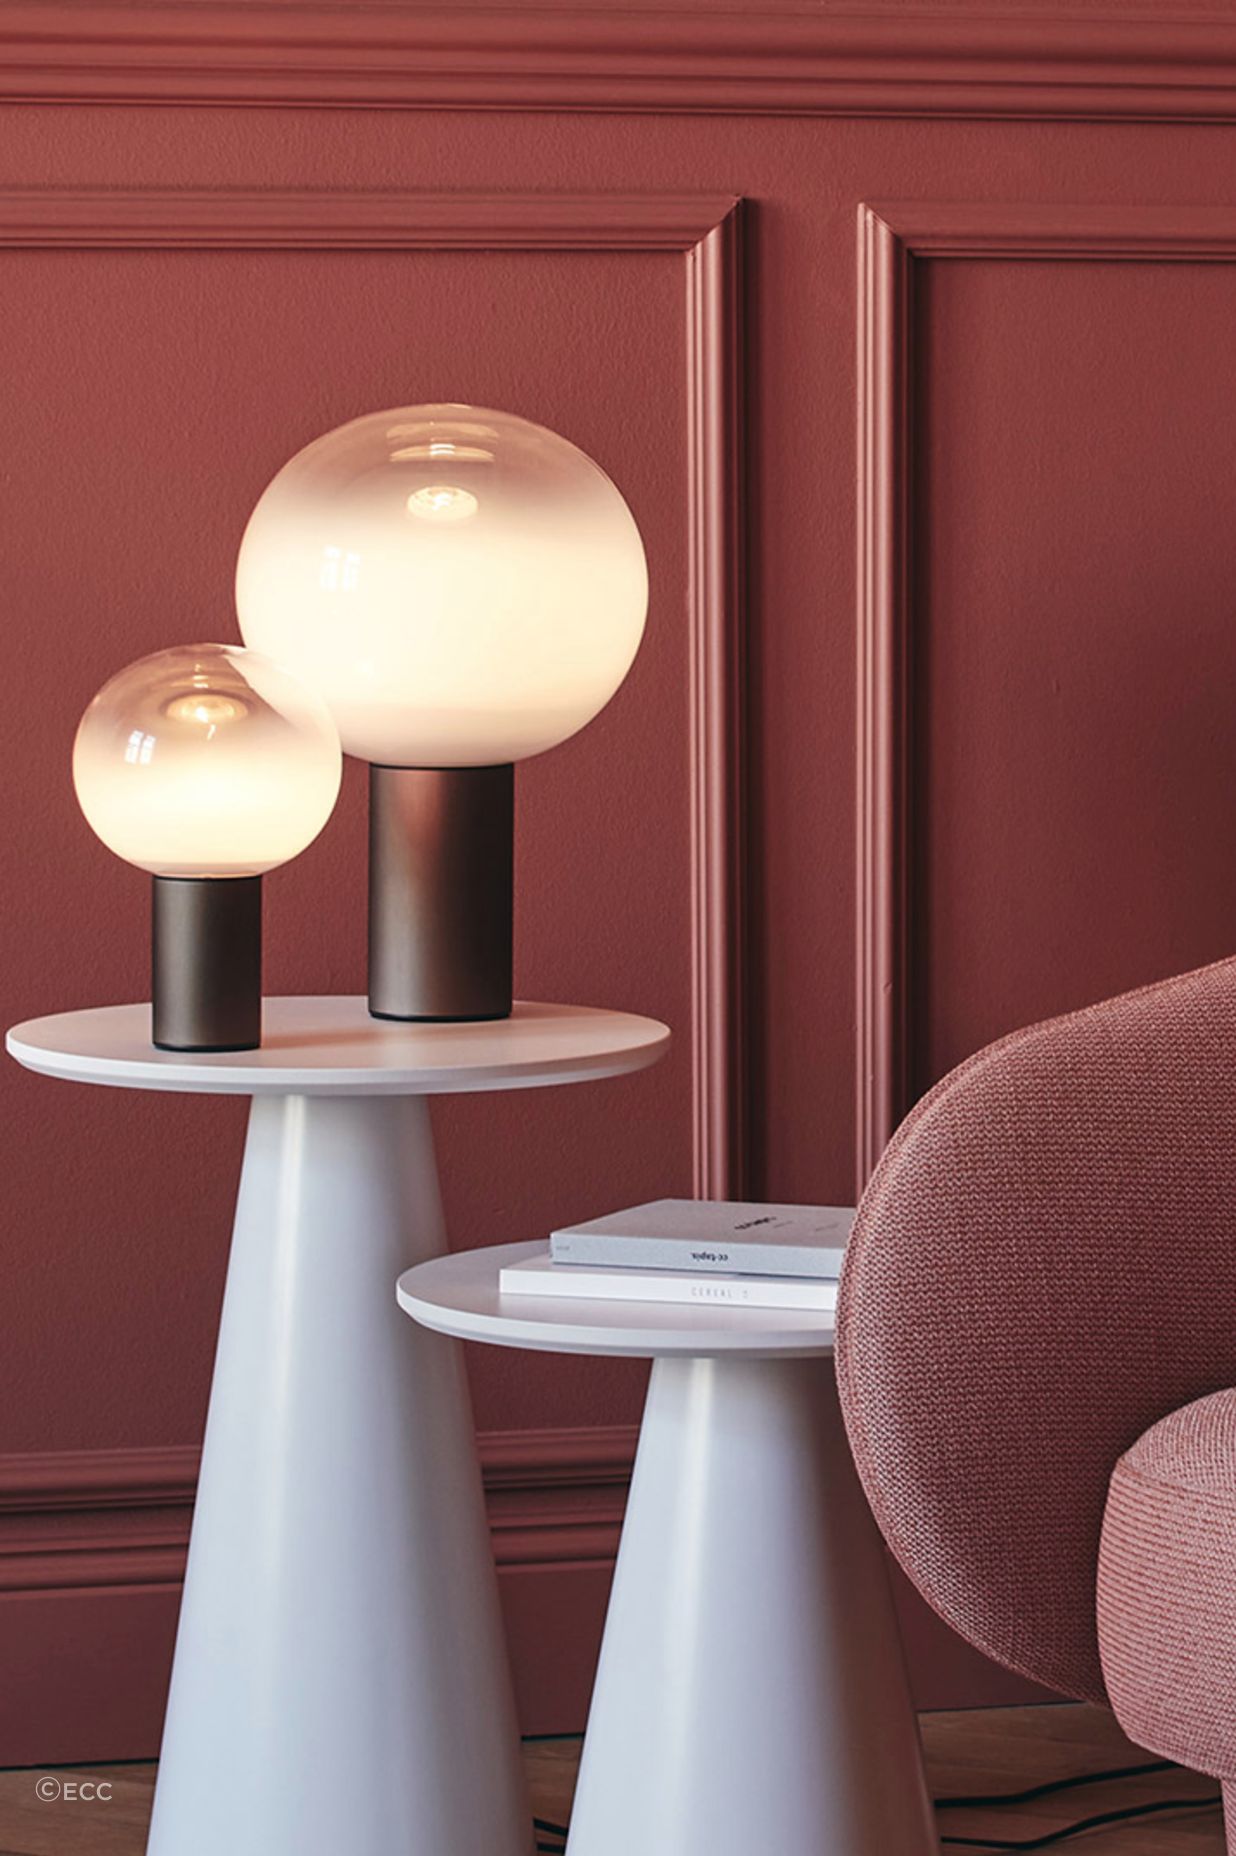 The stunning spherical lamp of the Laguna Table Lamp by Artemide is a real eye-catching feature